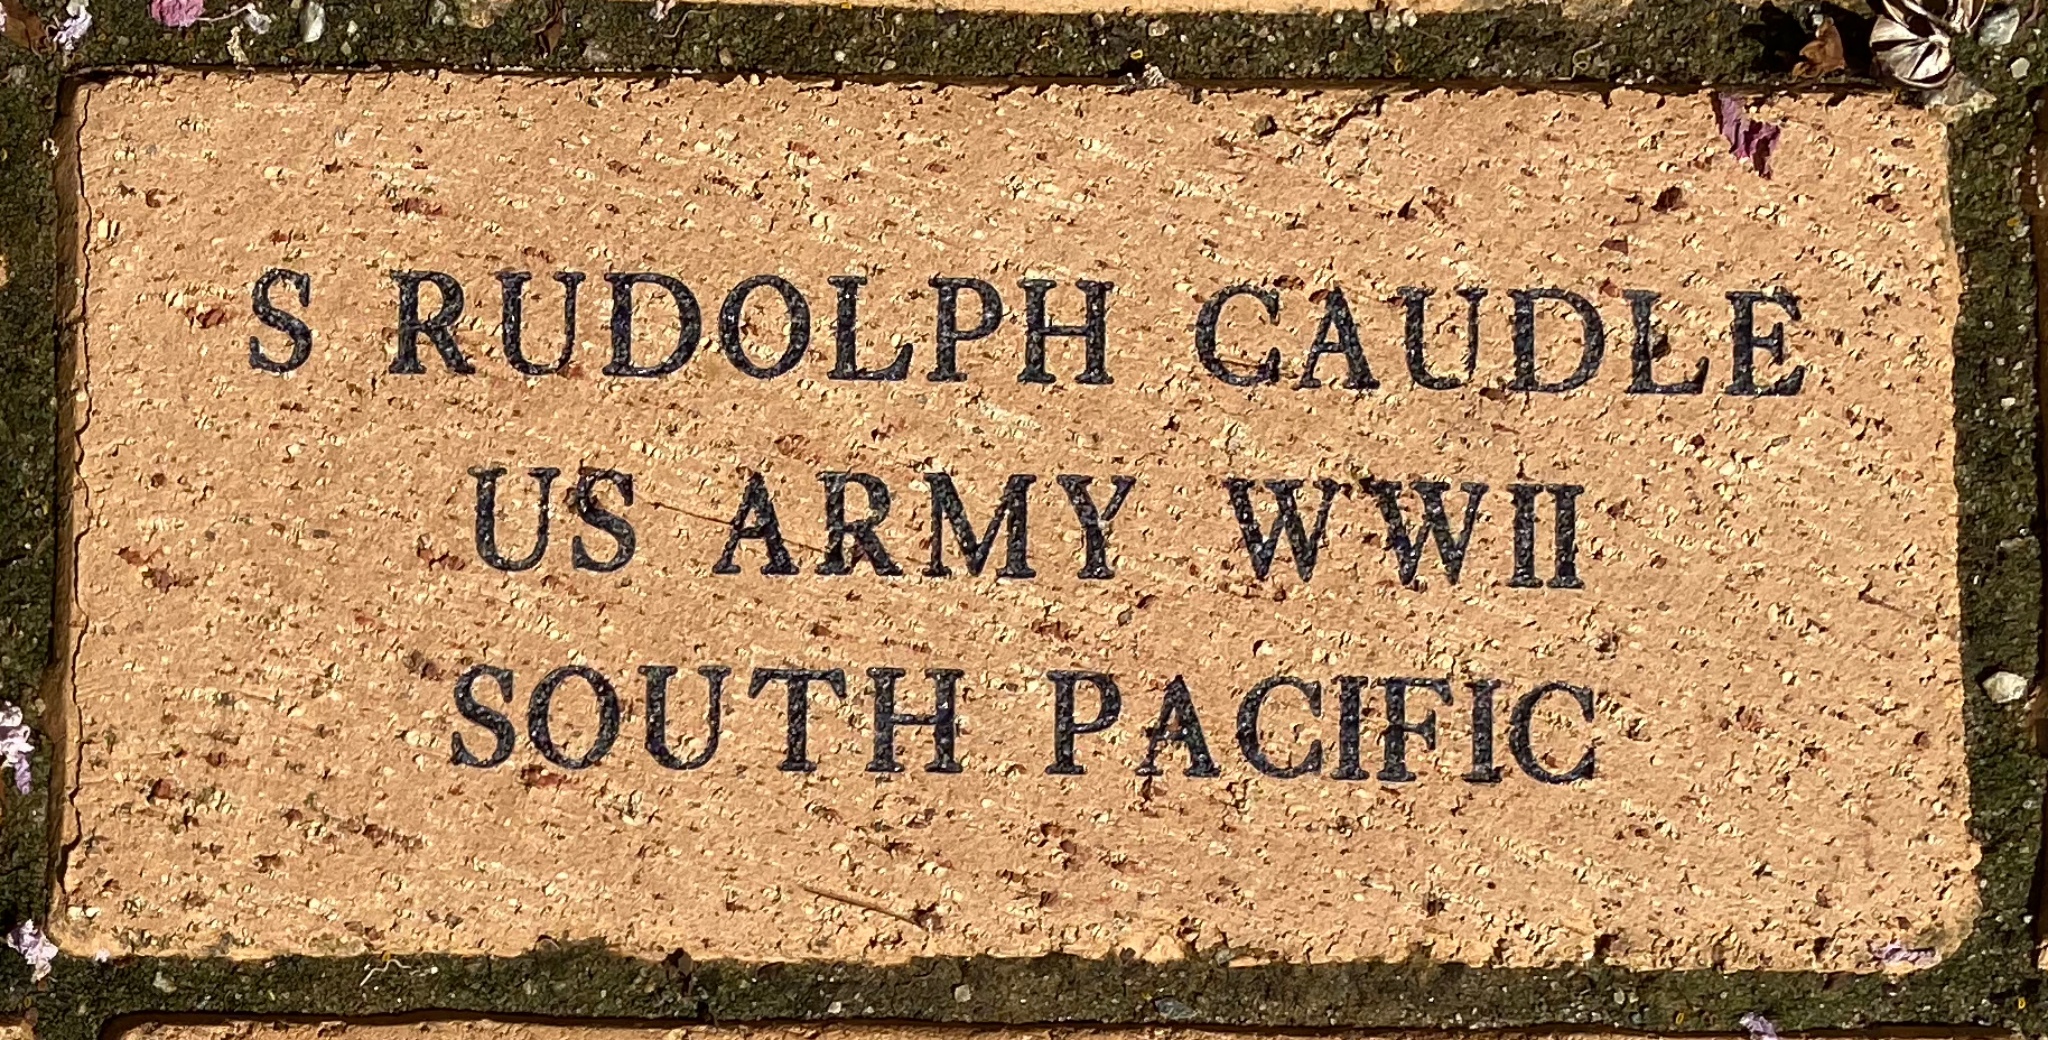 S RUDOLPH CAUDLE US ARMY WWII SOUTH PACIFIC